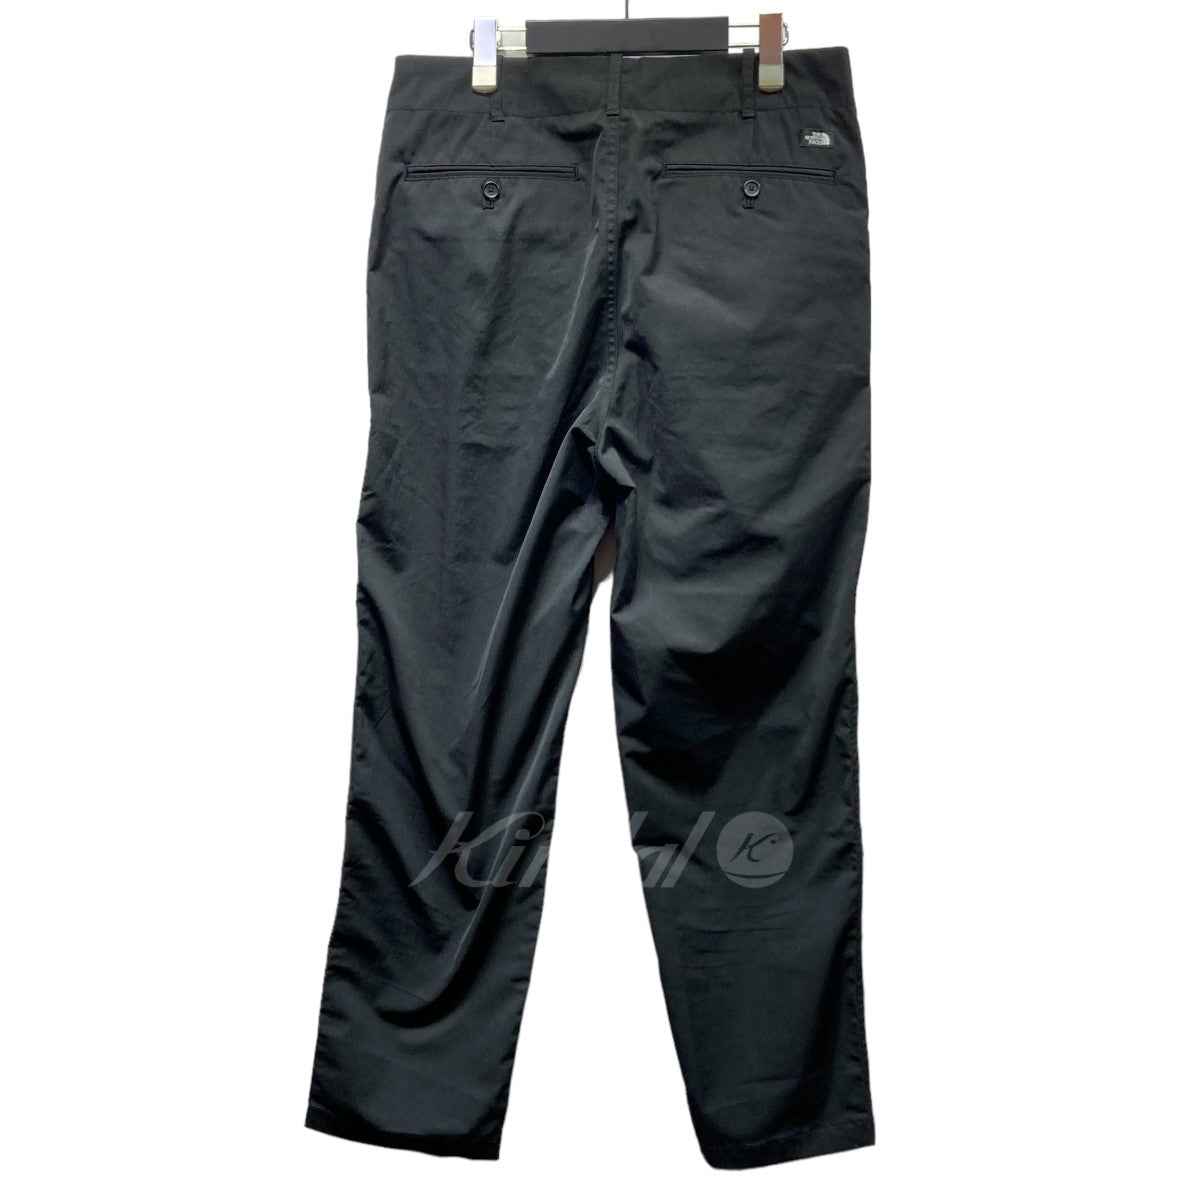 THE NORTH FACE(ザノースフェイス) Bison Chino Pant バイソン 